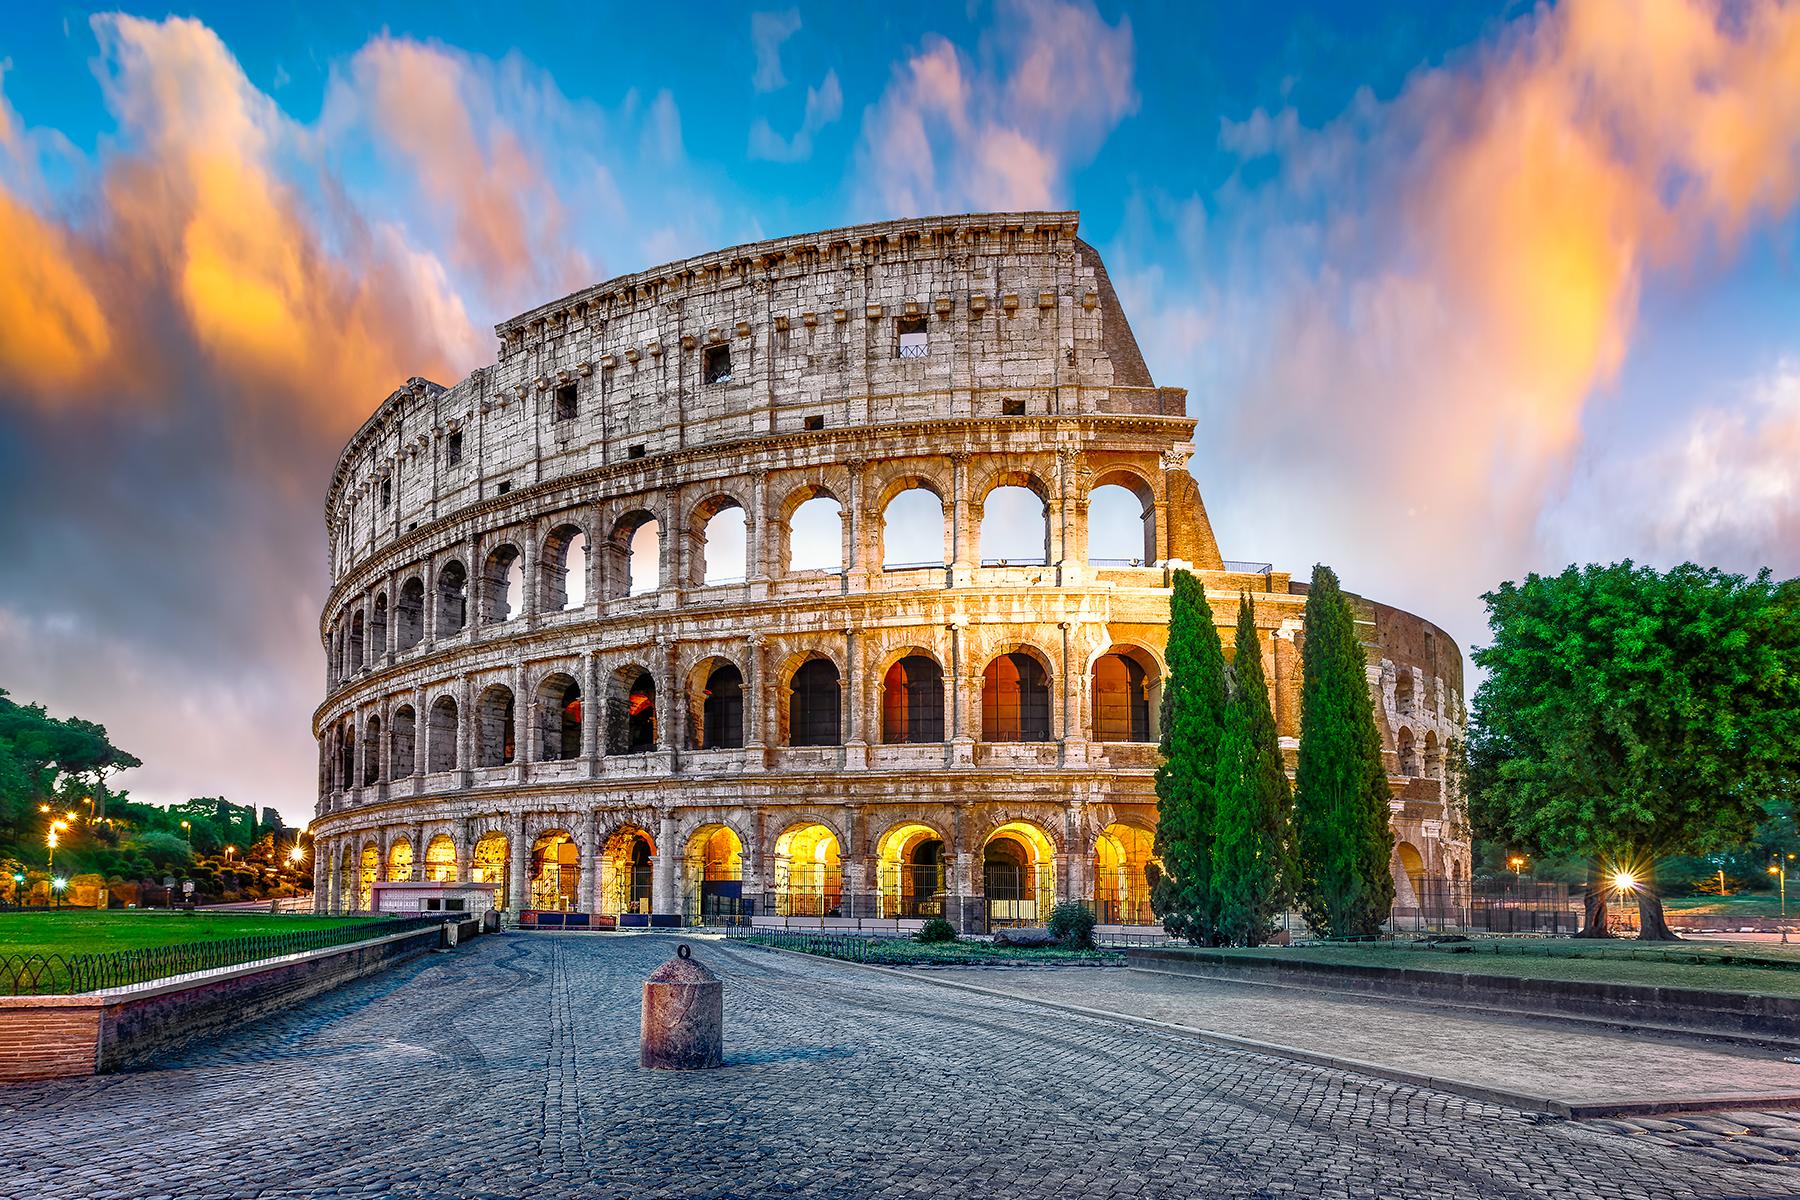 The 10 Best Ancient Sites in Rome